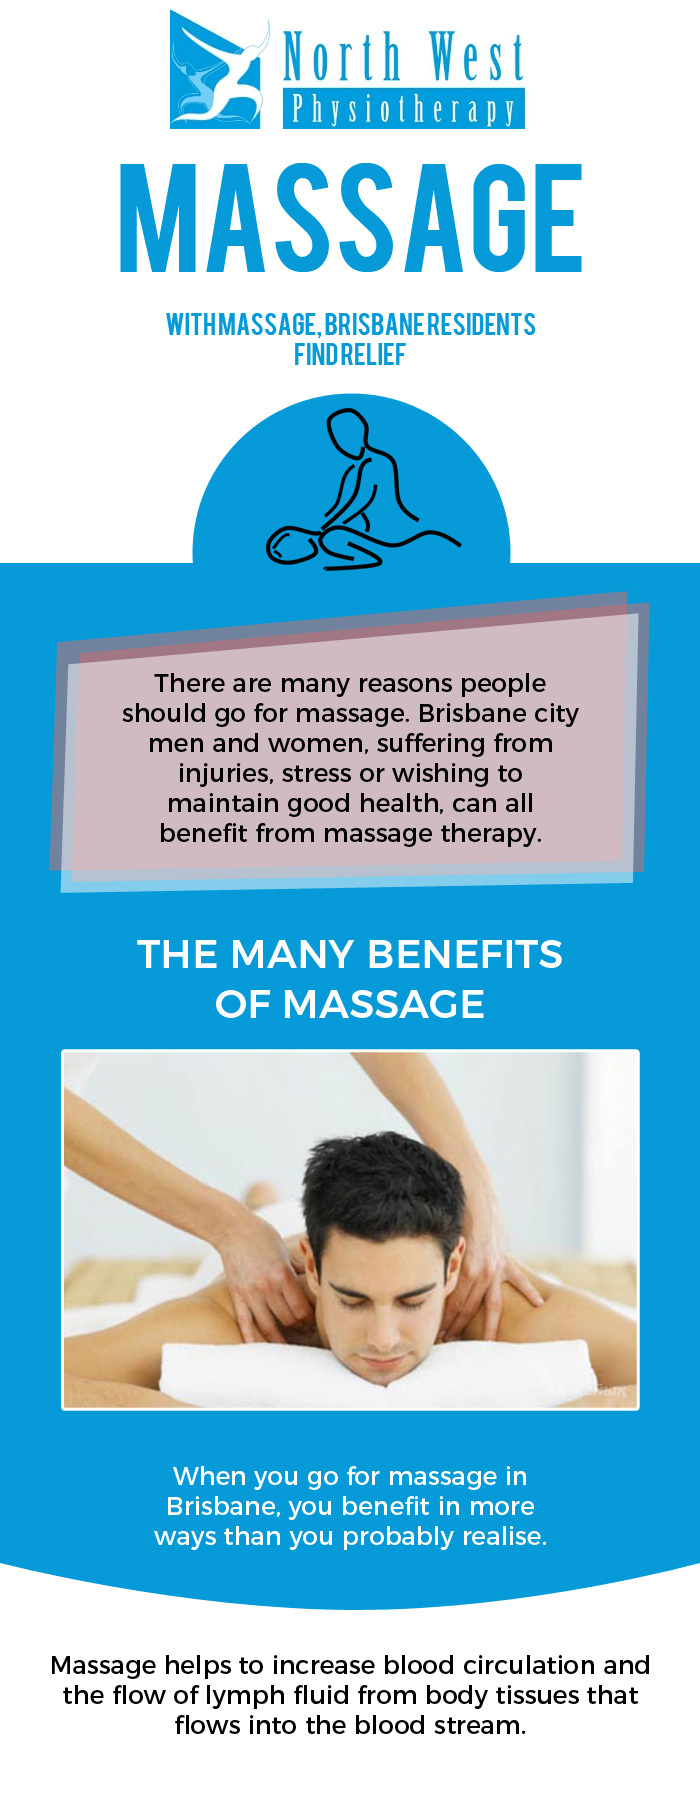 Reduce Stress & Tension with North West Physiotherapy’s Massage Therapy